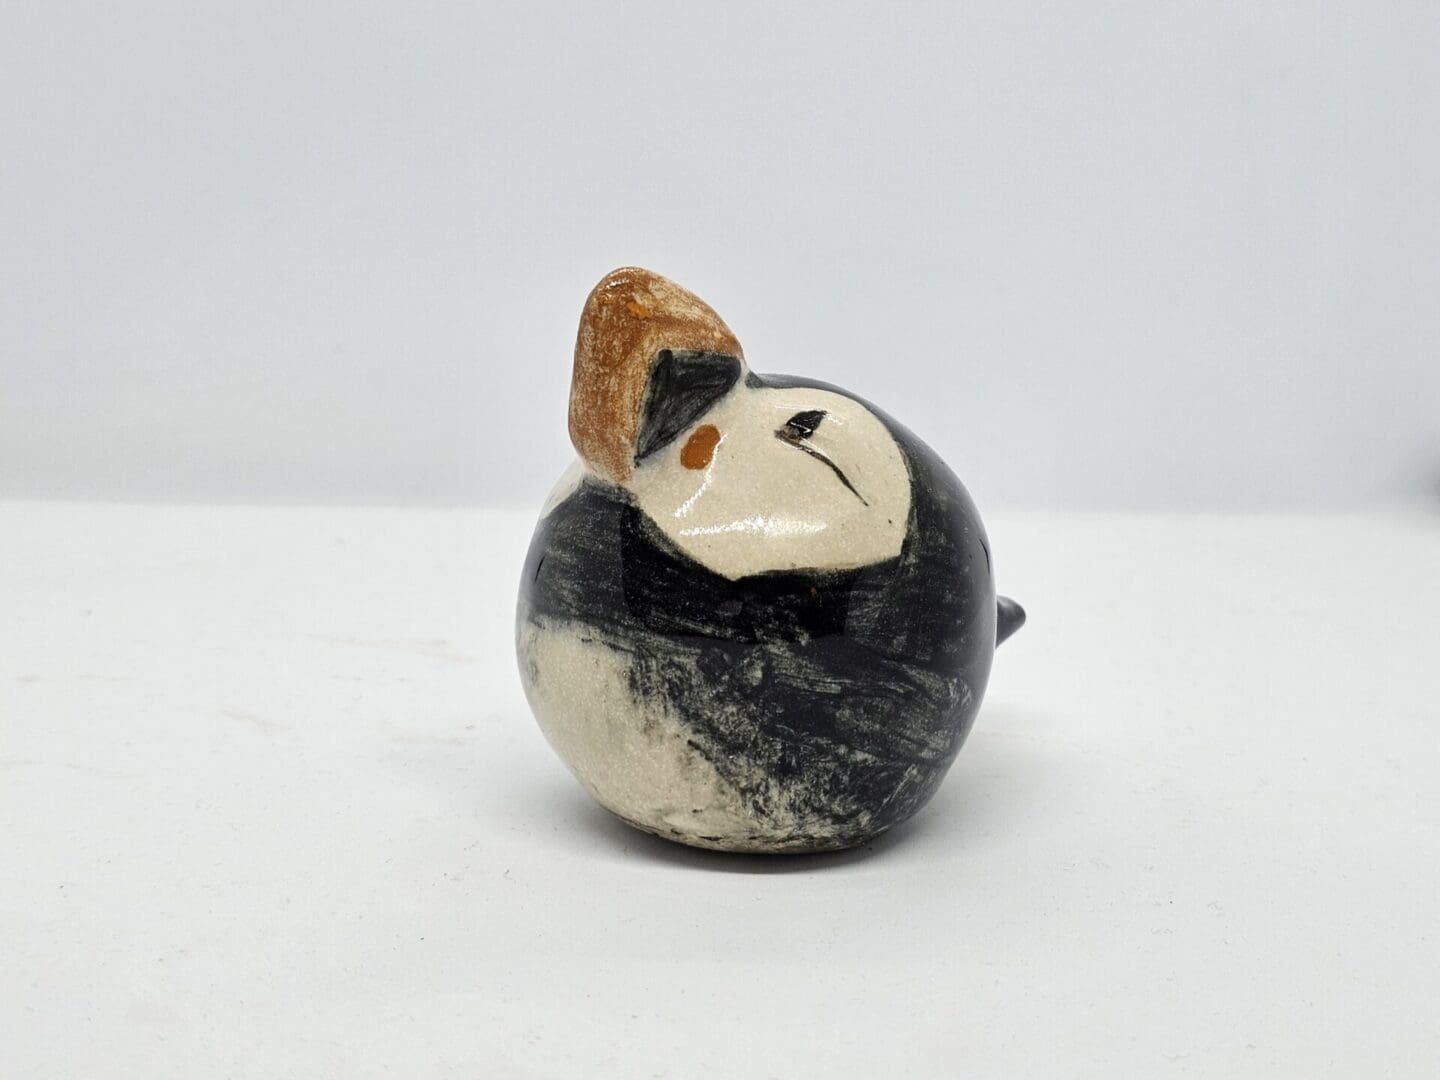 On a white background, a front-left facing view of a ceramic puffin